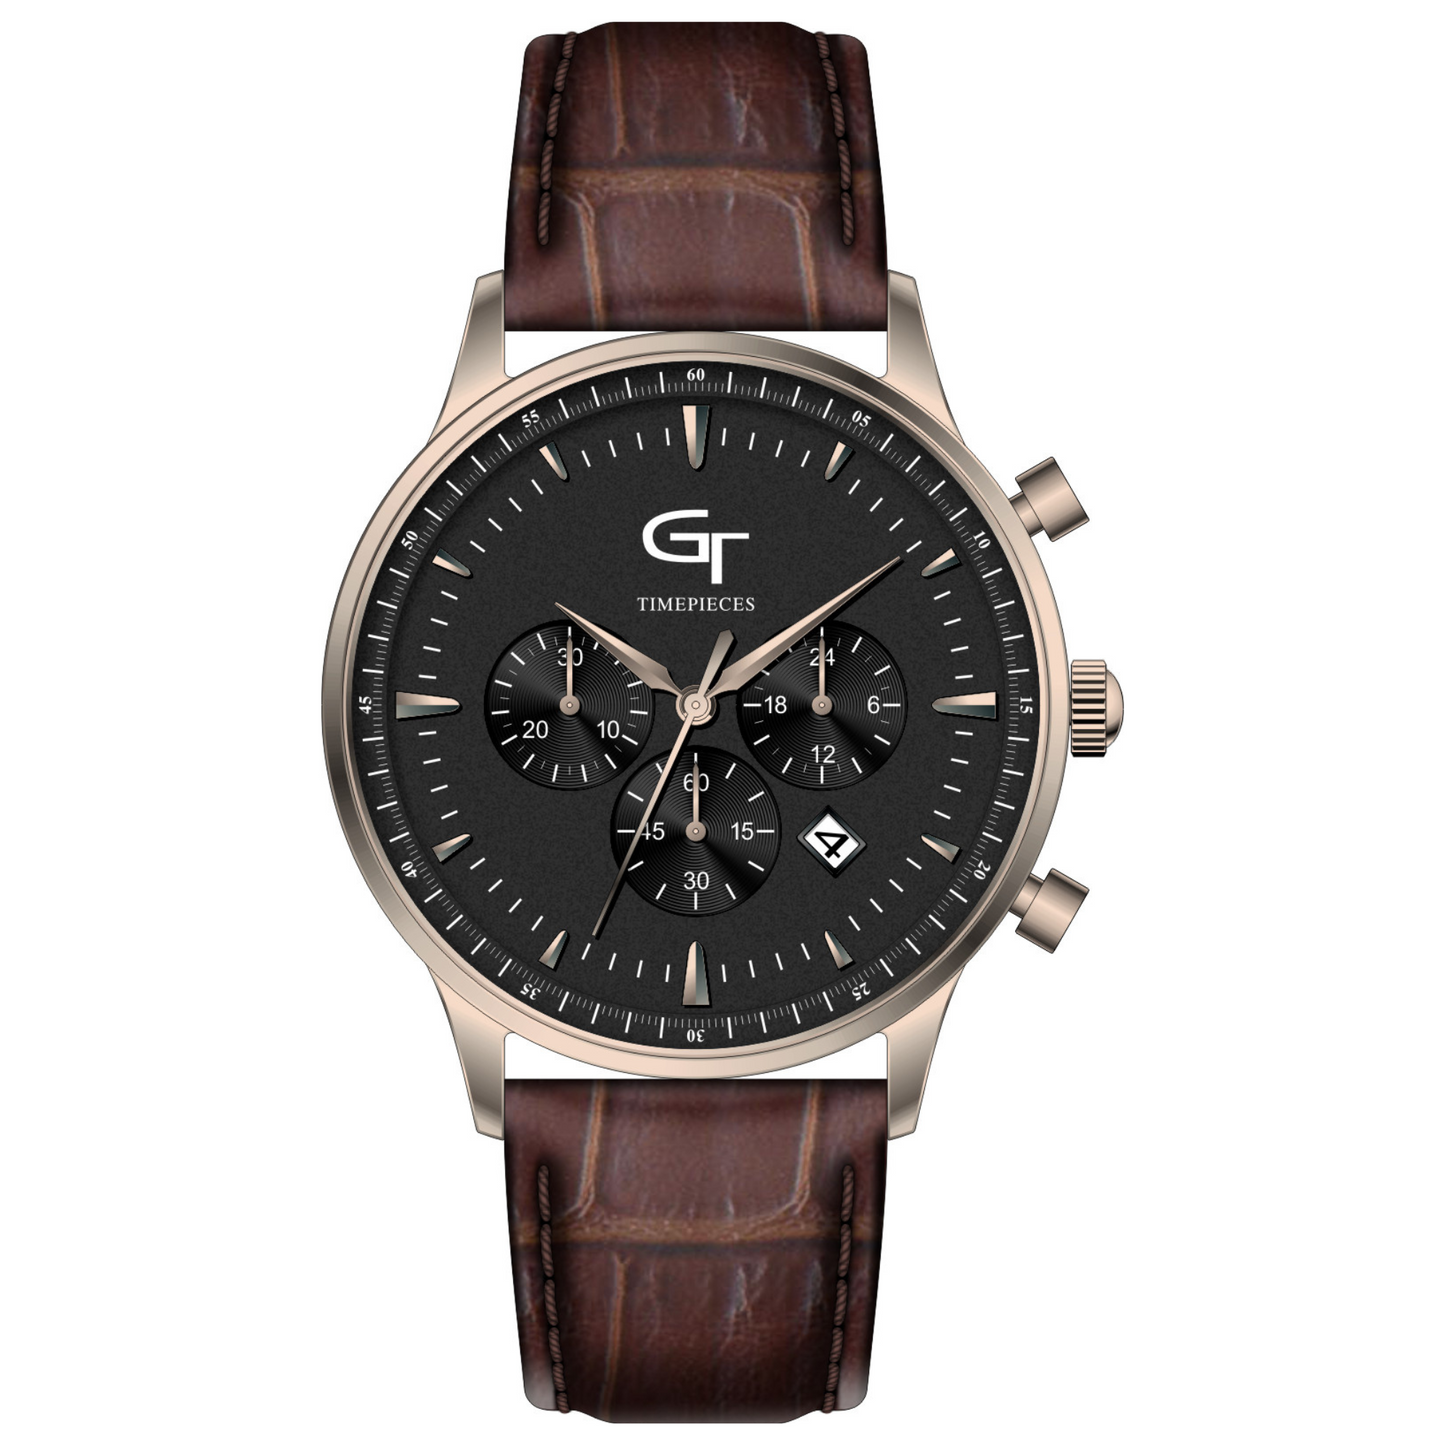 Men's Watch - Brown Leather Strap - Black Watch Face